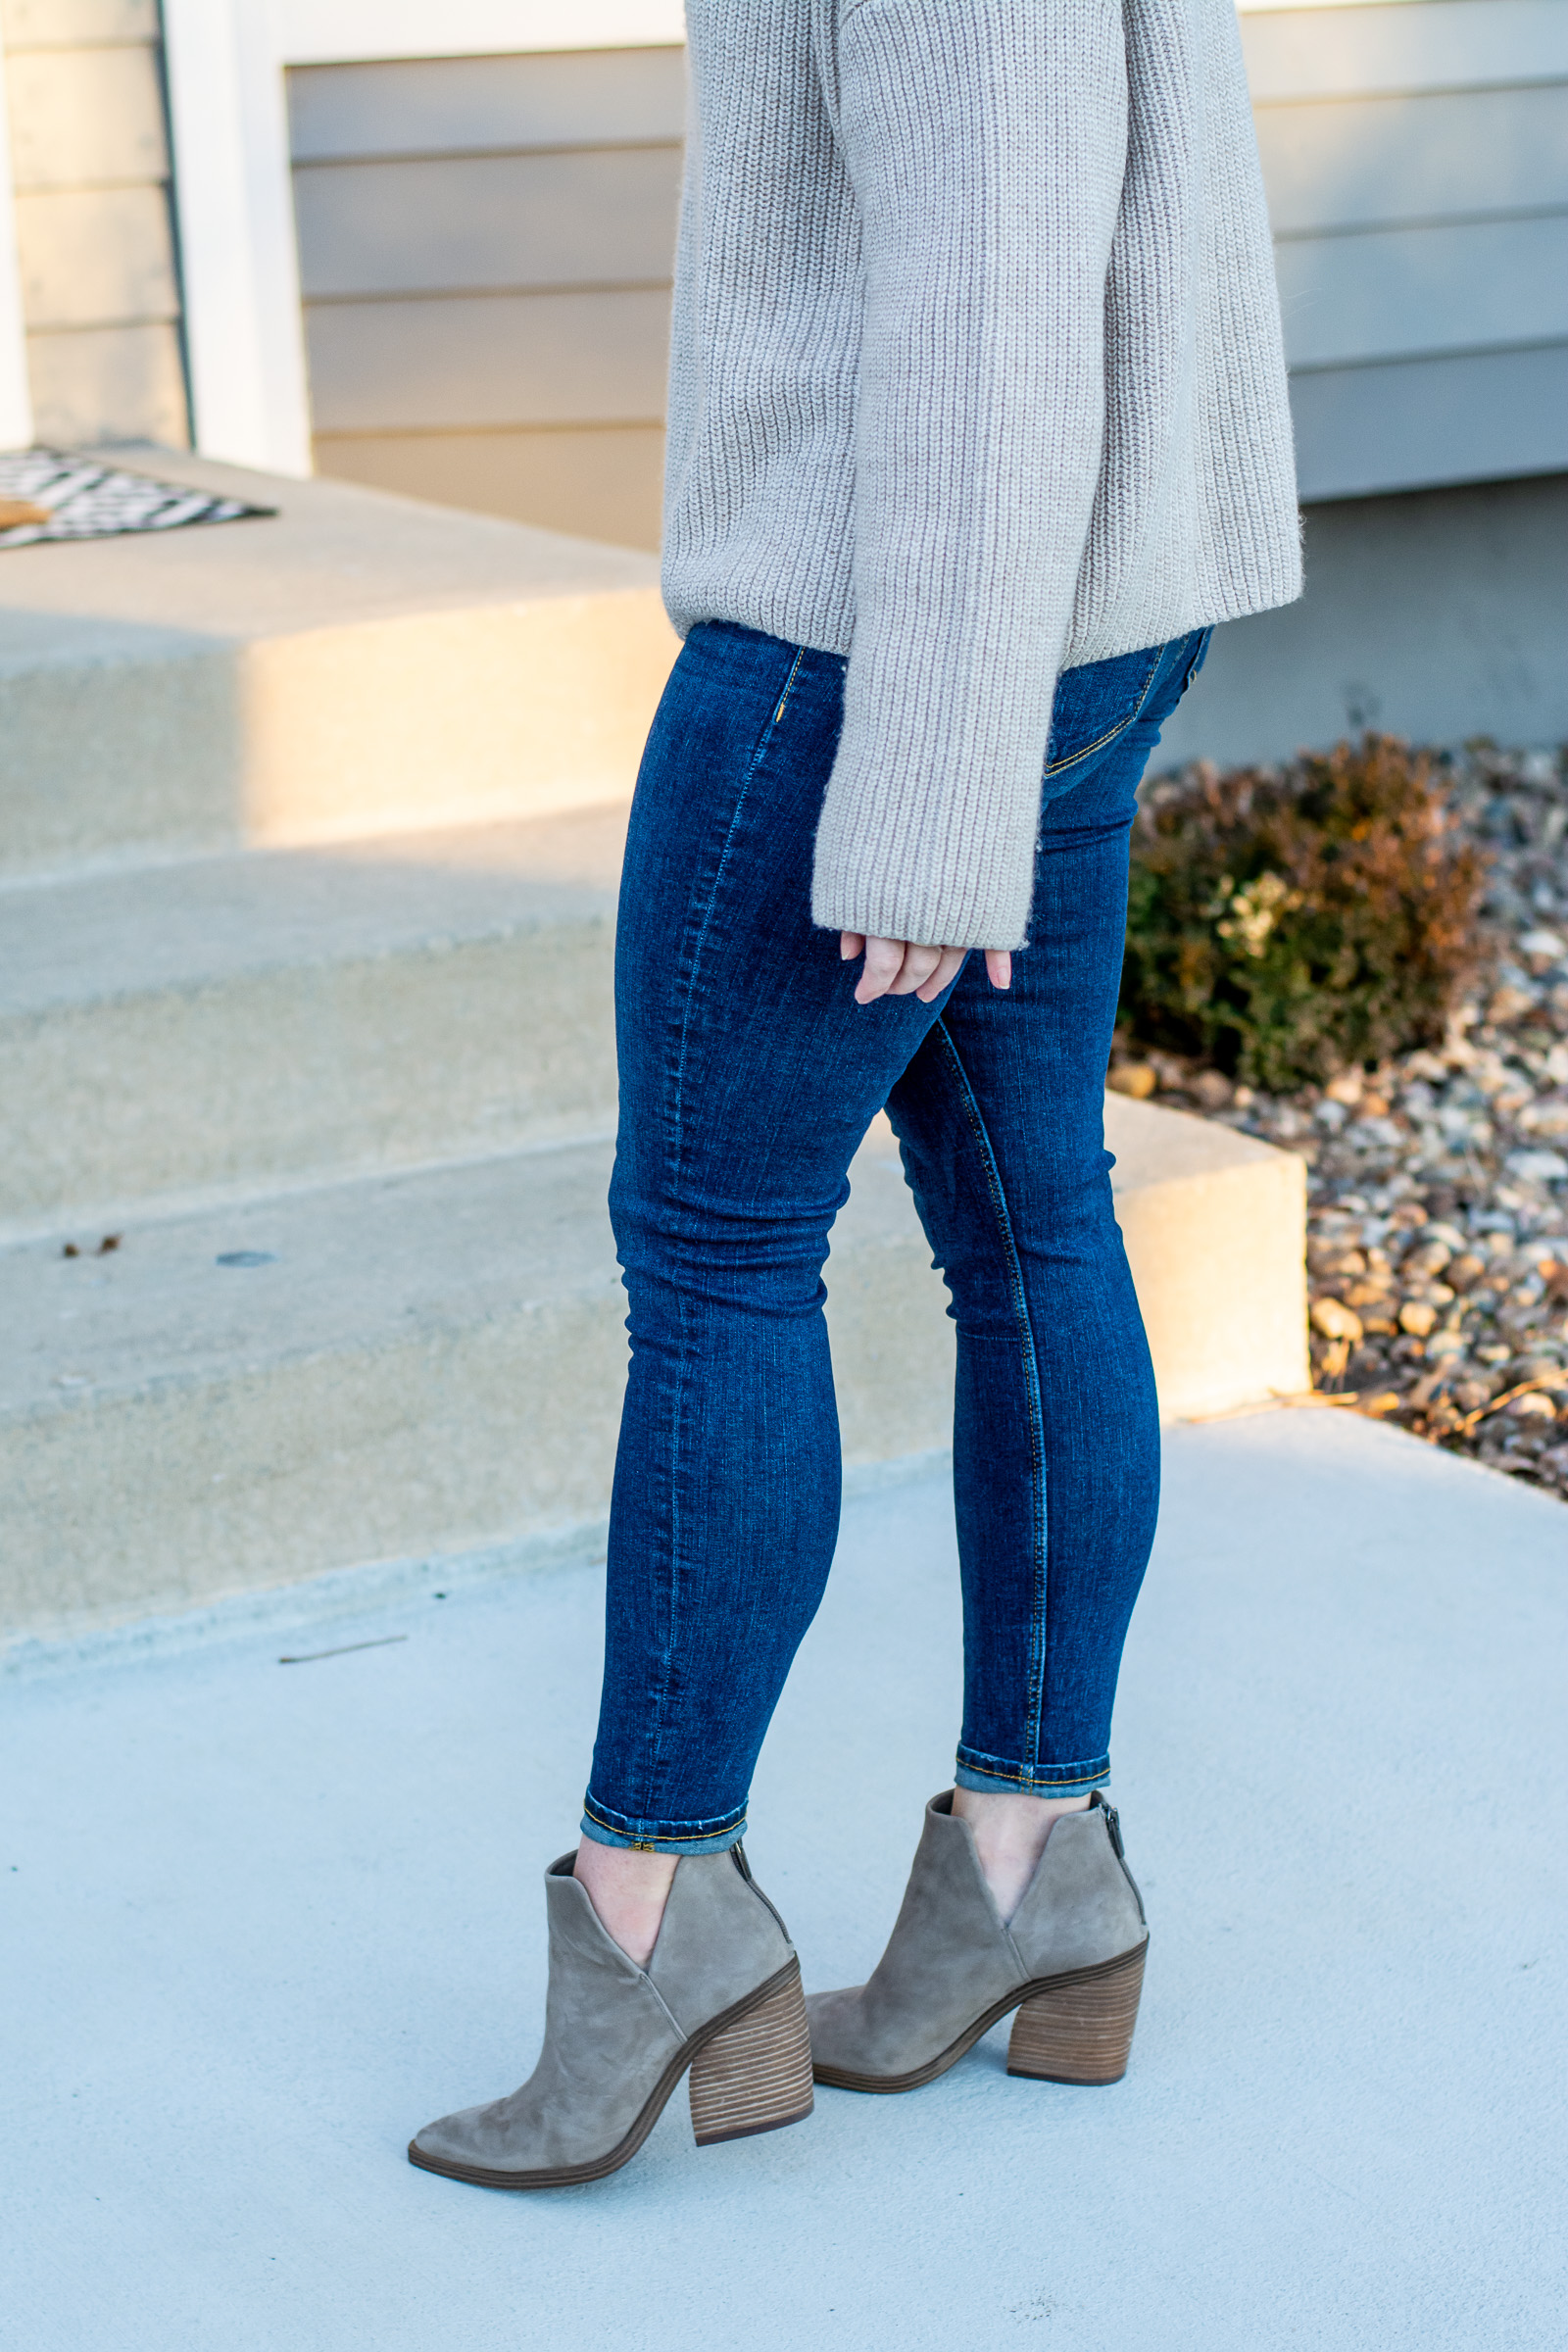 Neutral Booties for Winter. | LSR